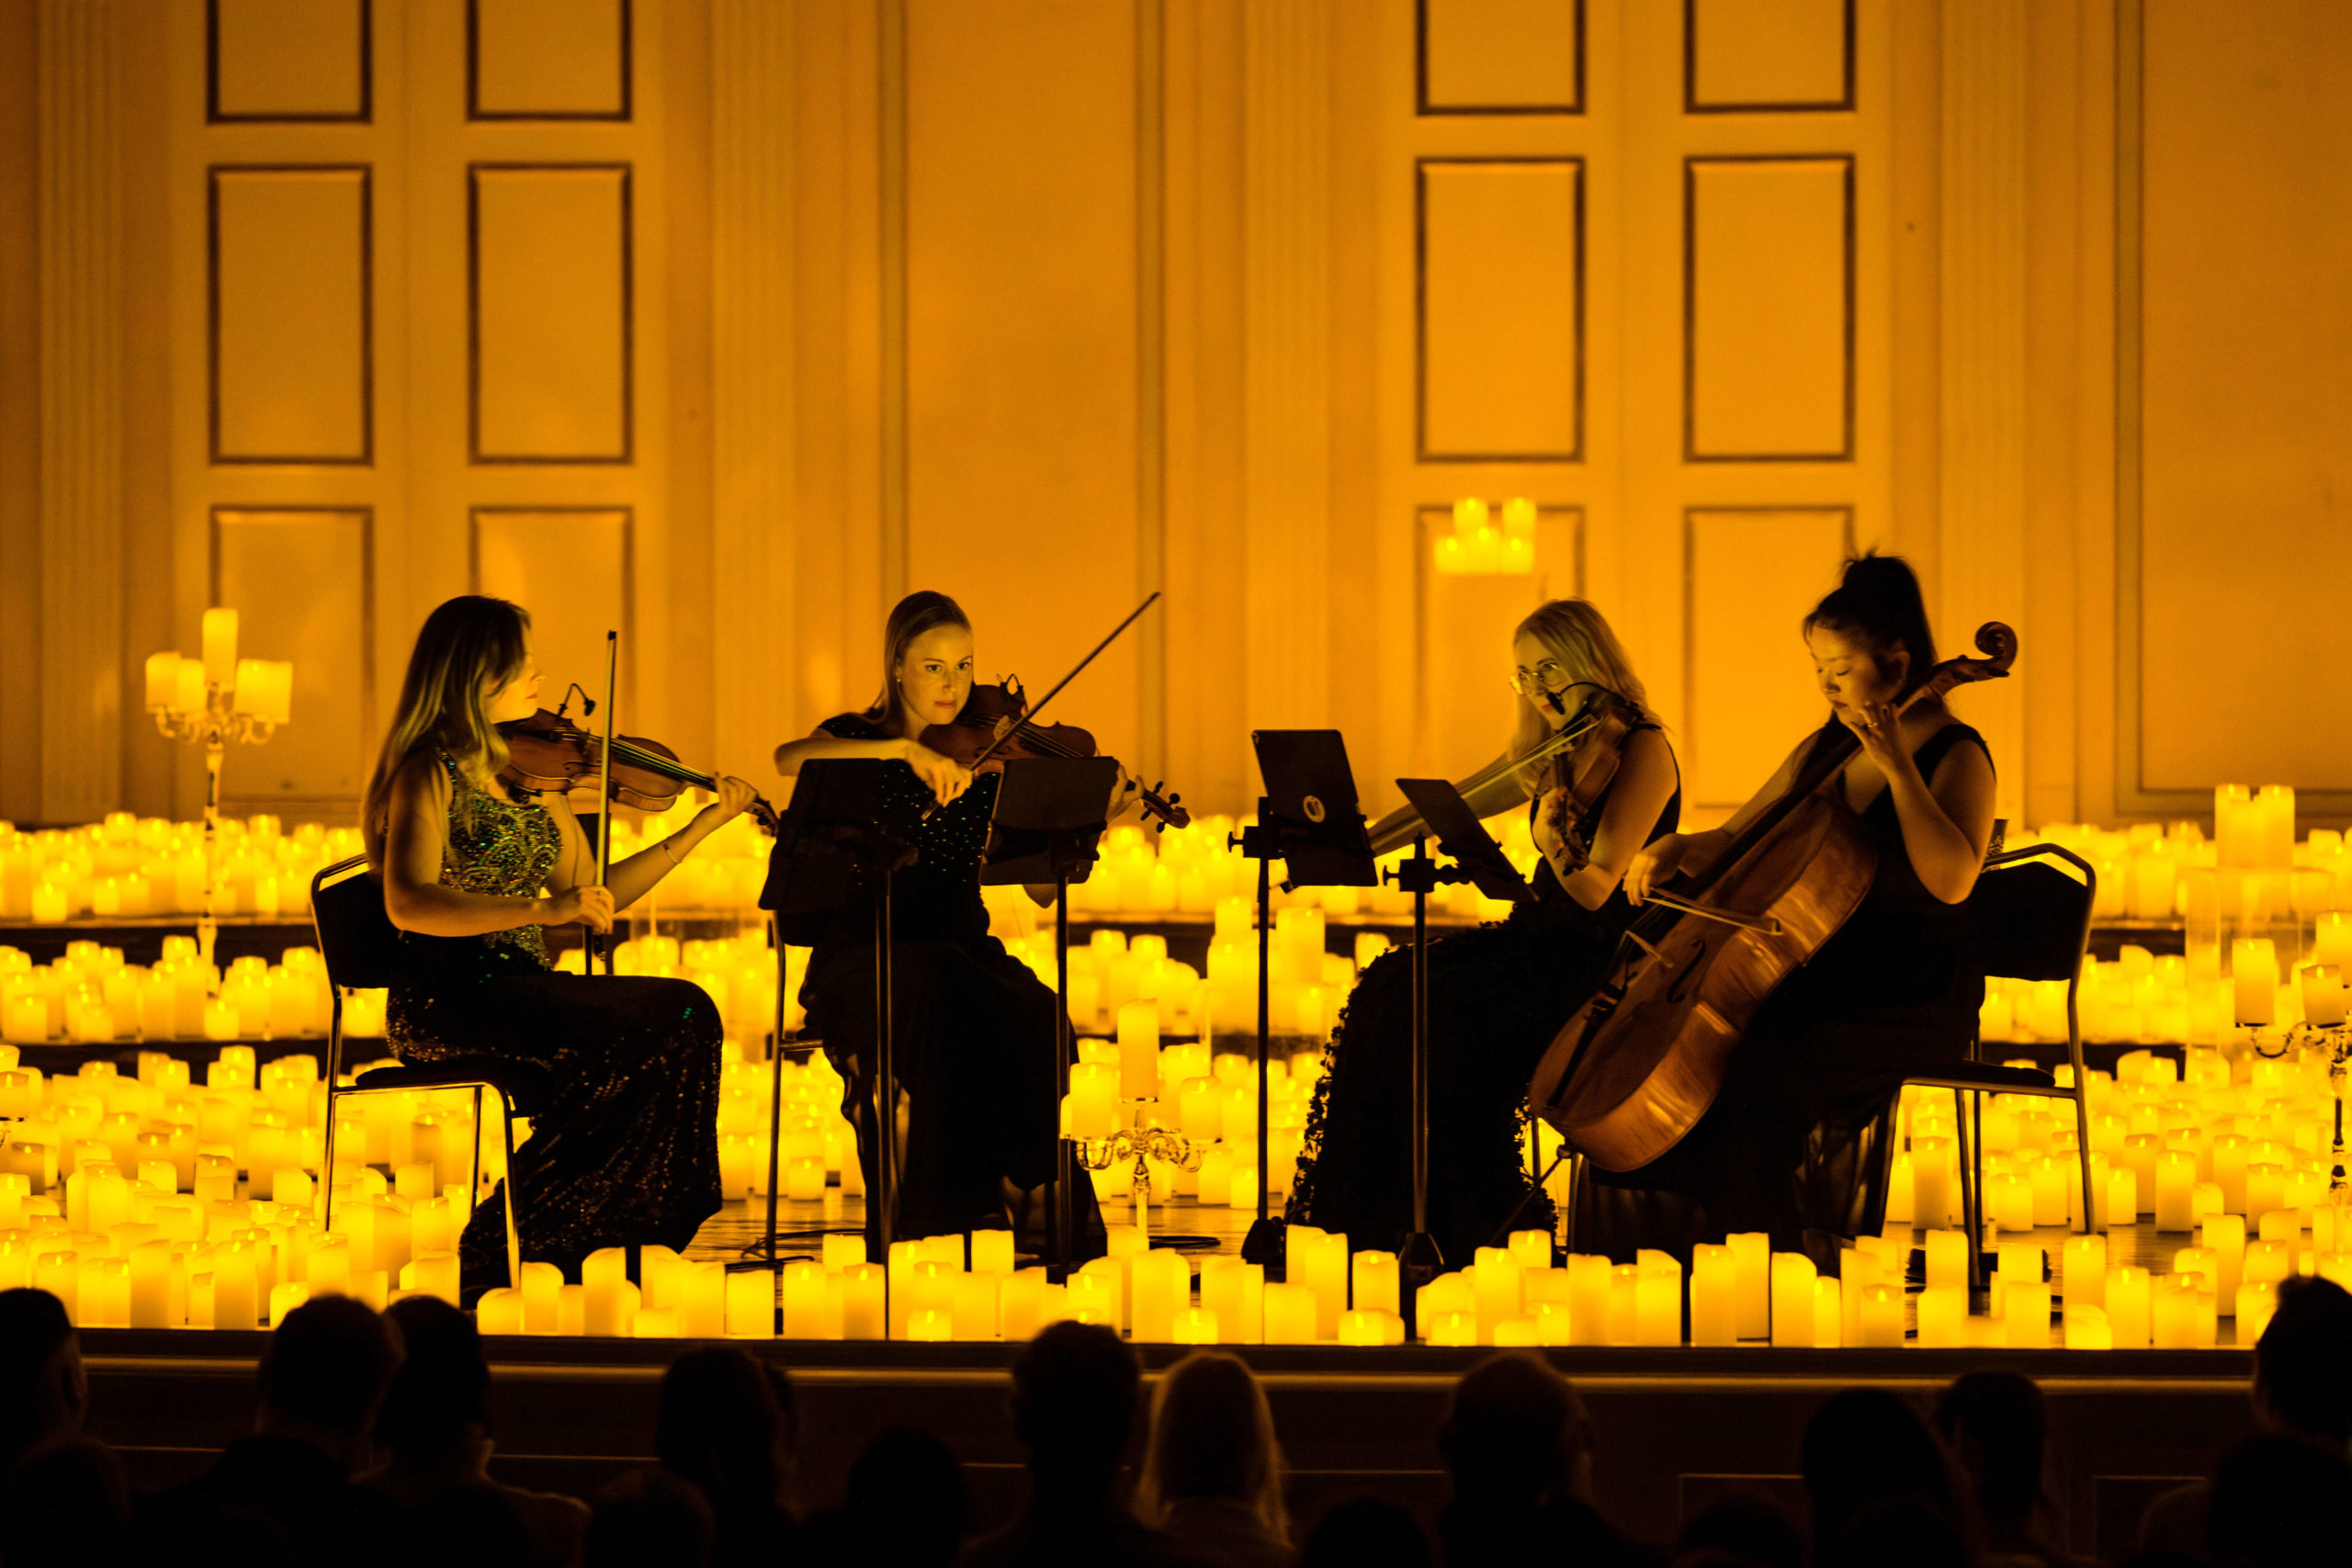 A string quartet play, surrounded by candles.